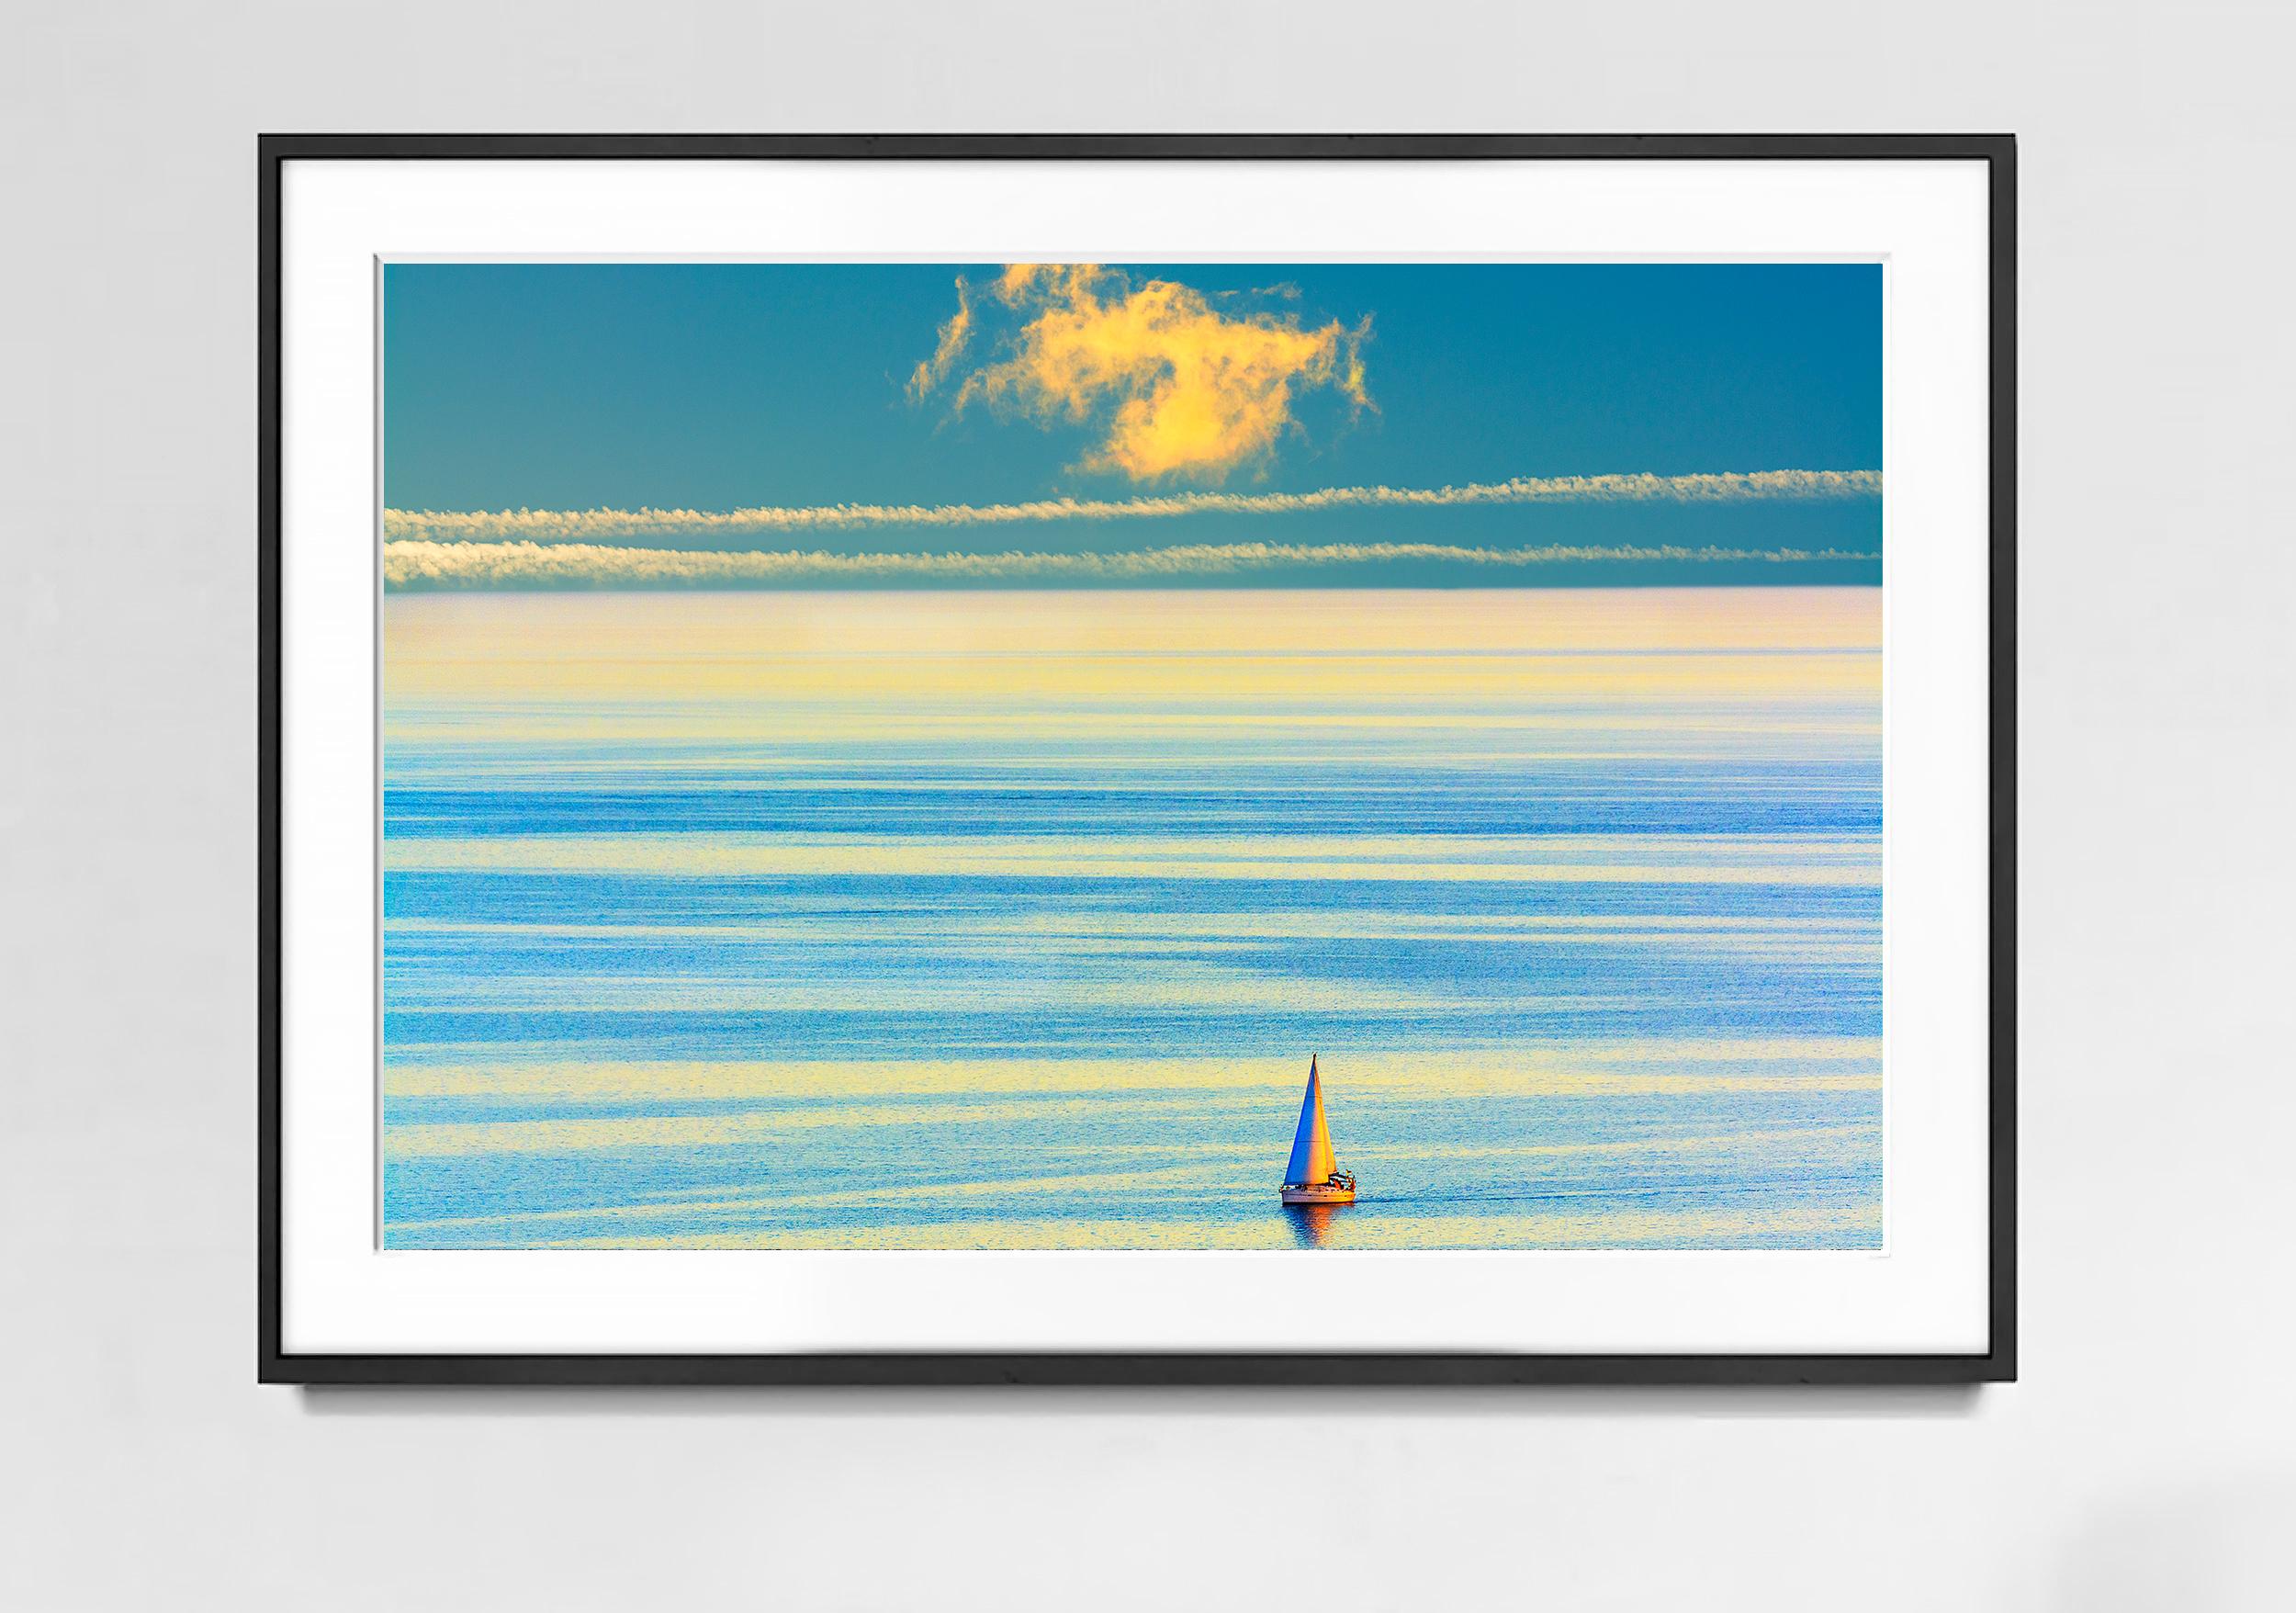 Lone Sailboat on a placid turquoise sea - Photograph by Mitchell Funk